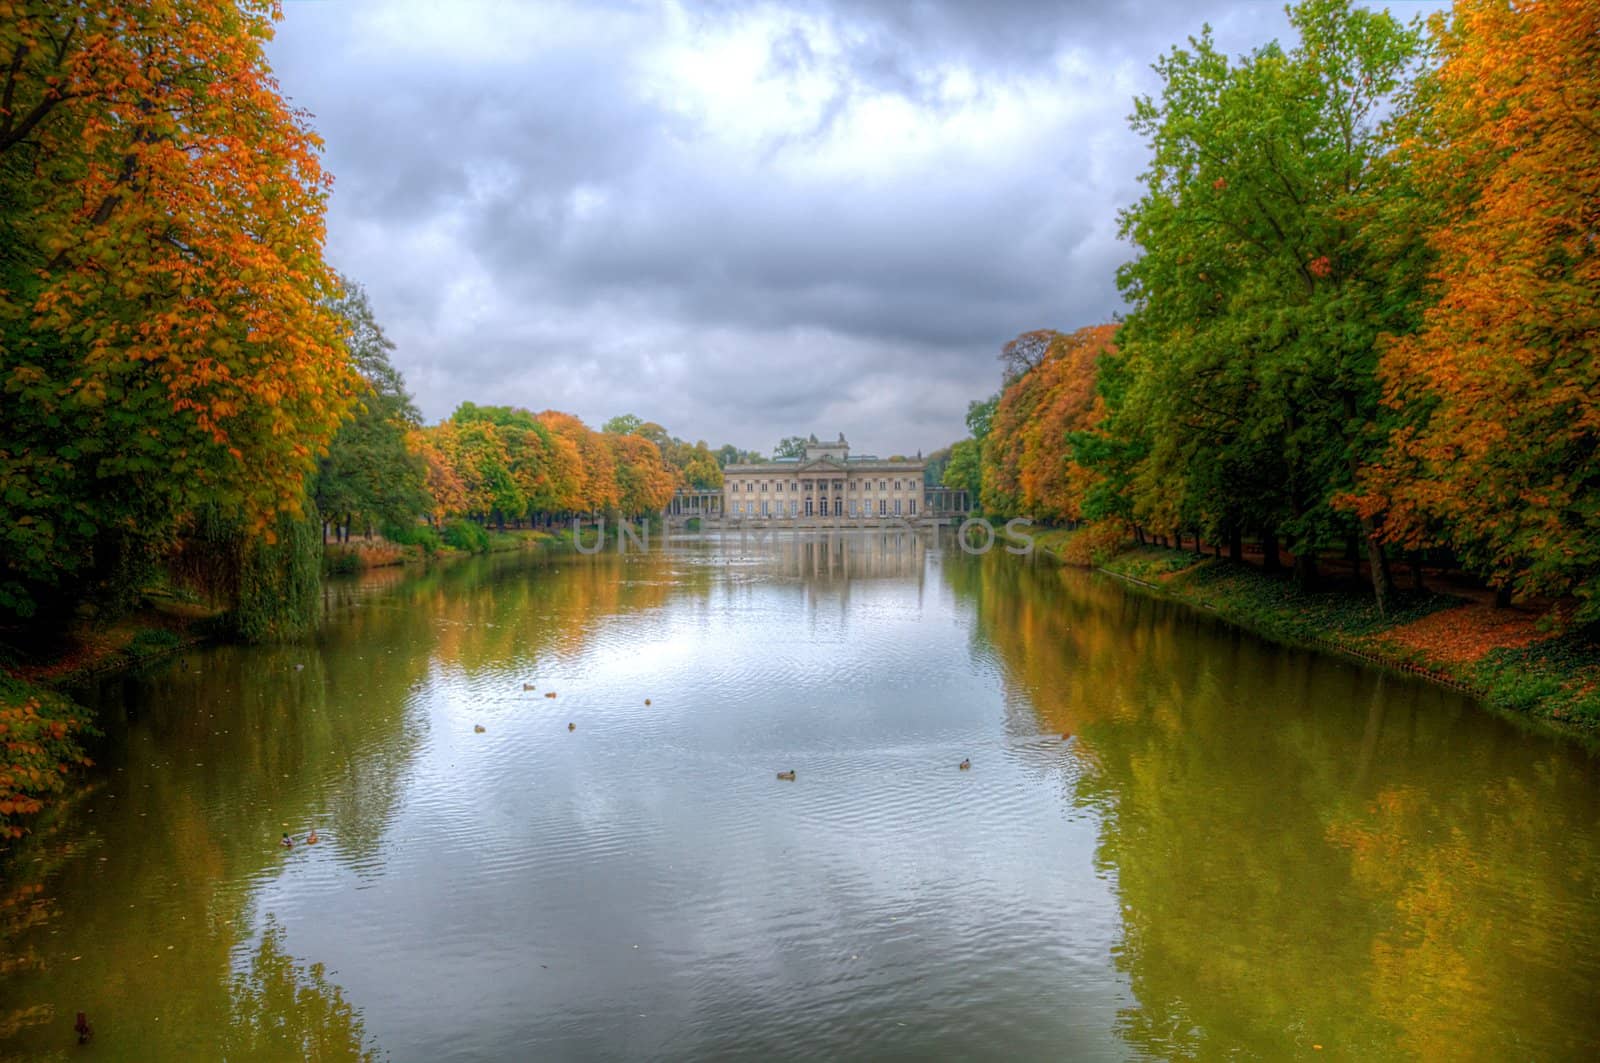 lazienki park warsaw poland in autumn, showing trees of different colors, lake or pond reflecting a historic building, clouds